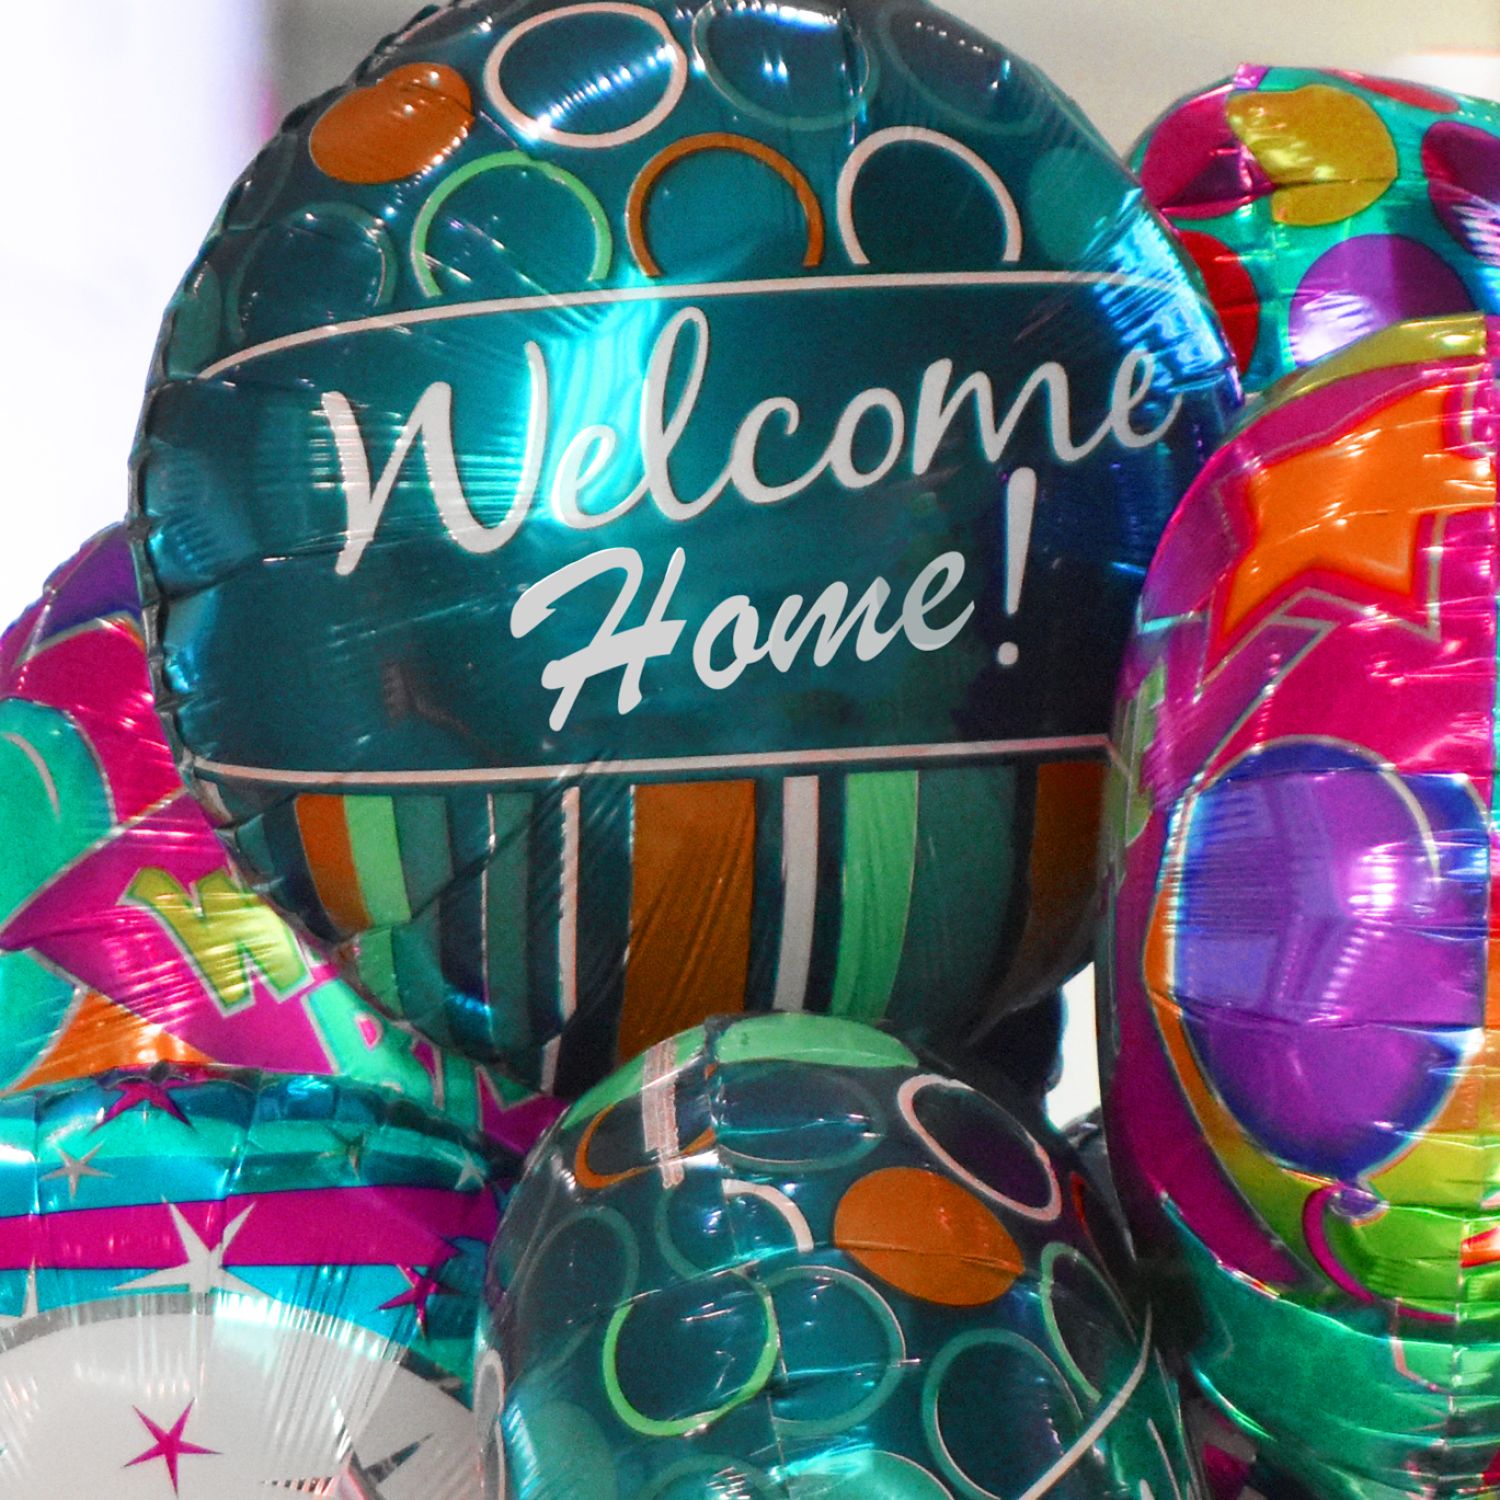 Assortment of foil balloons that say, "Welcome home!"